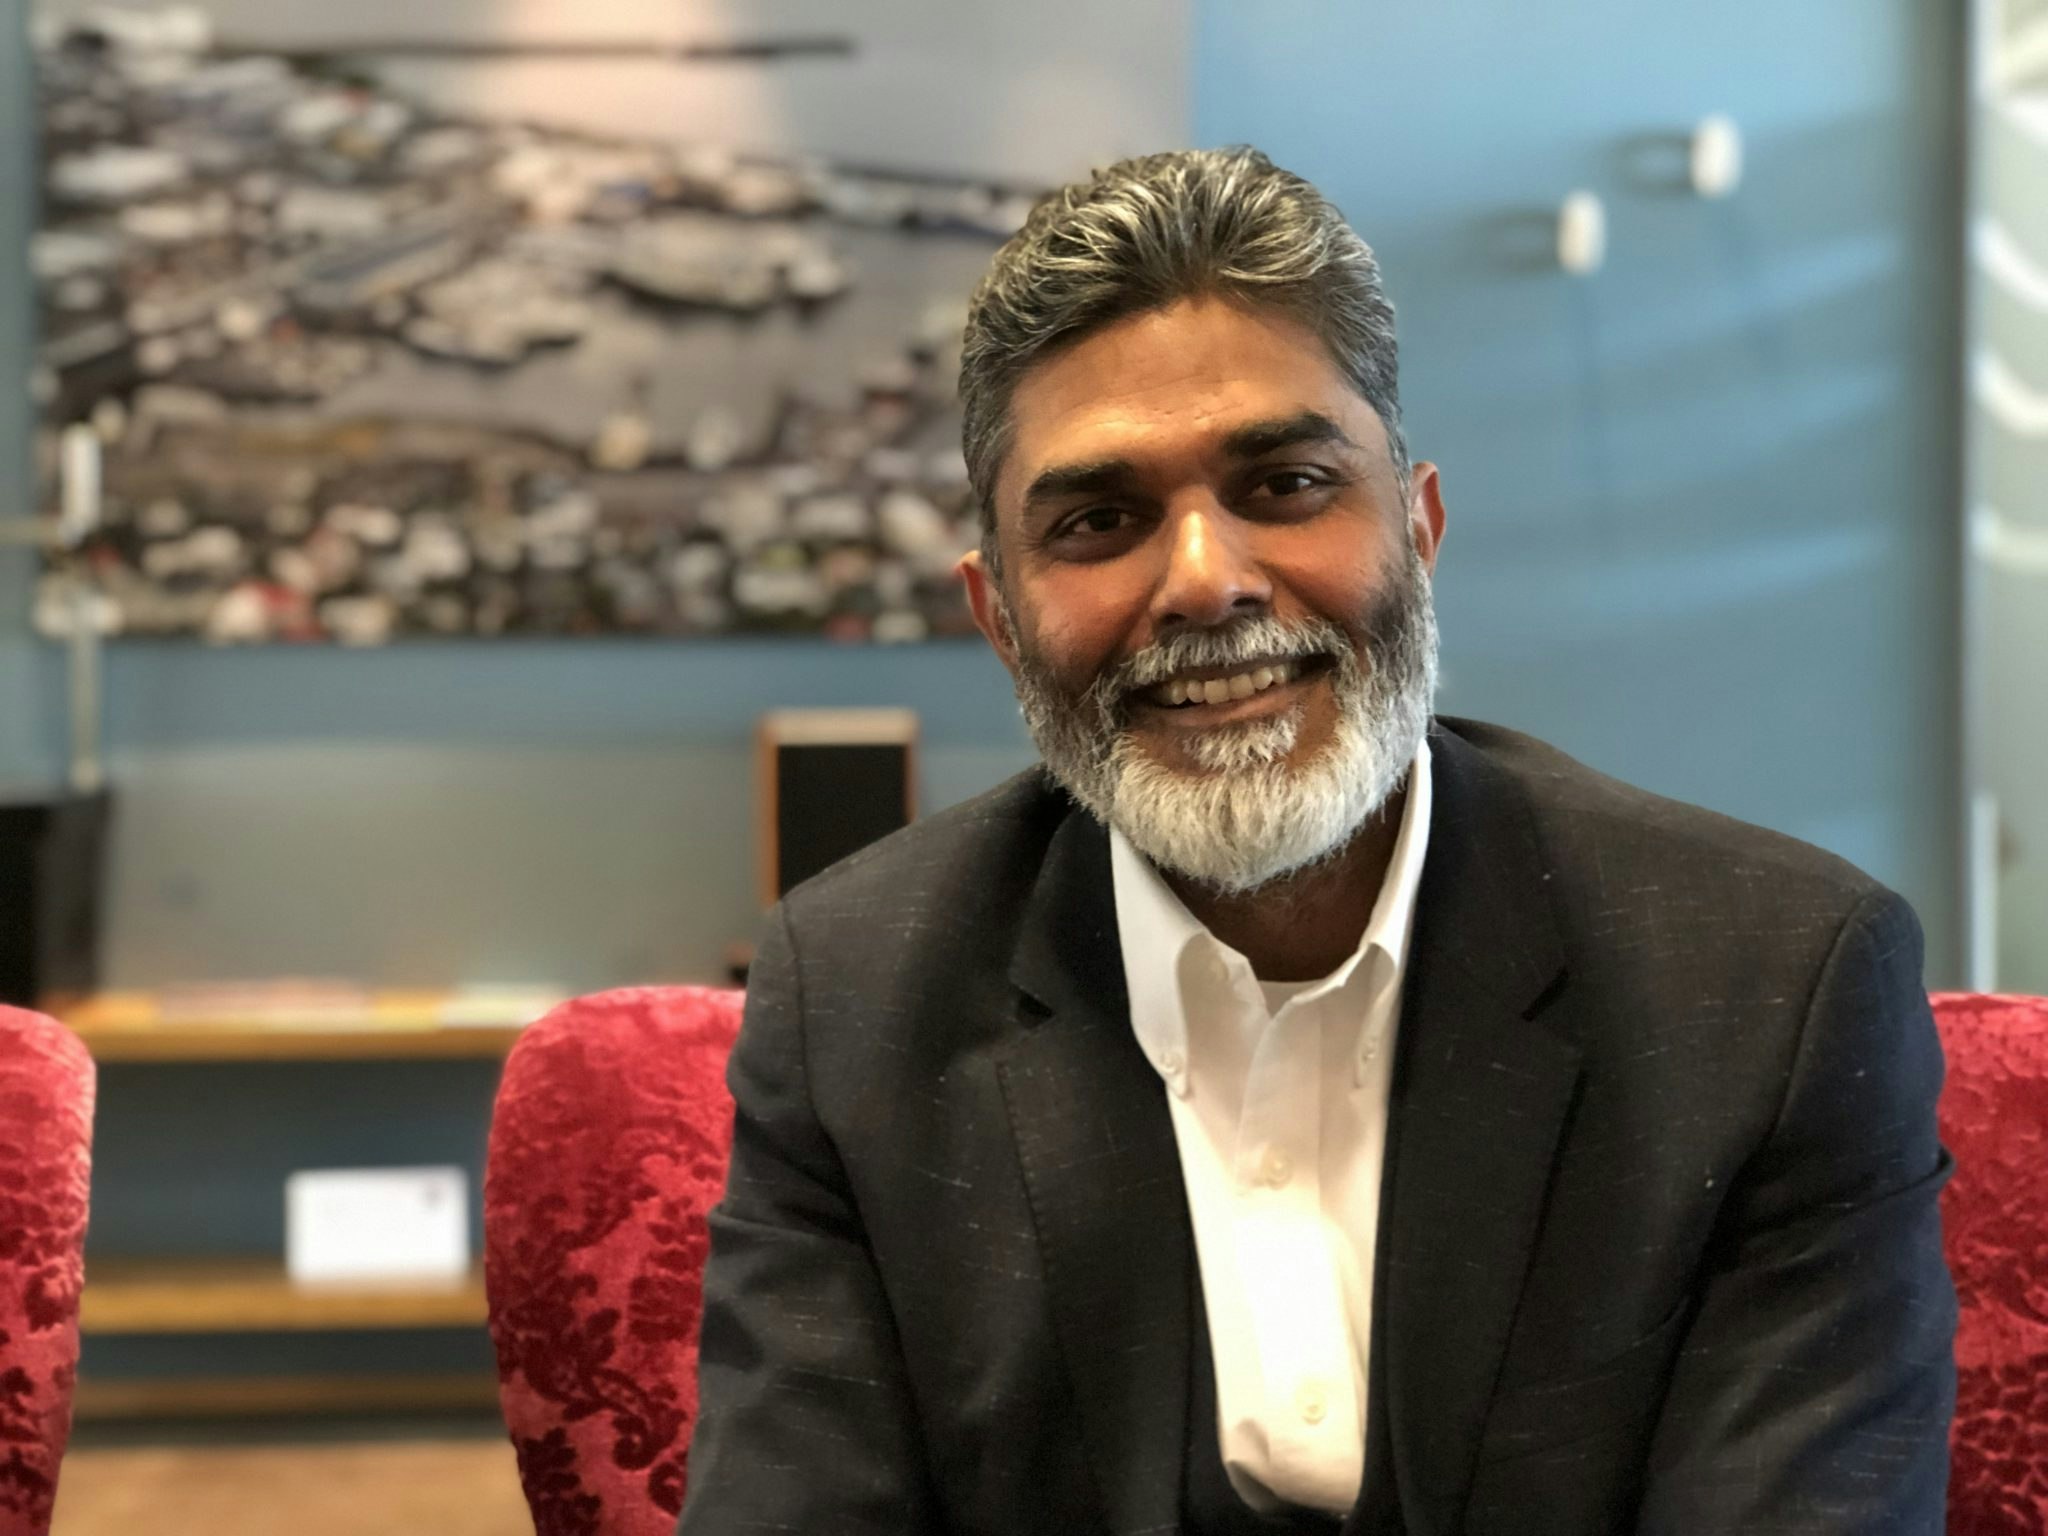 Image of Bala Kamallakharan, a consultant who's helped build the tech scene for Icelandic Startups for the past decade